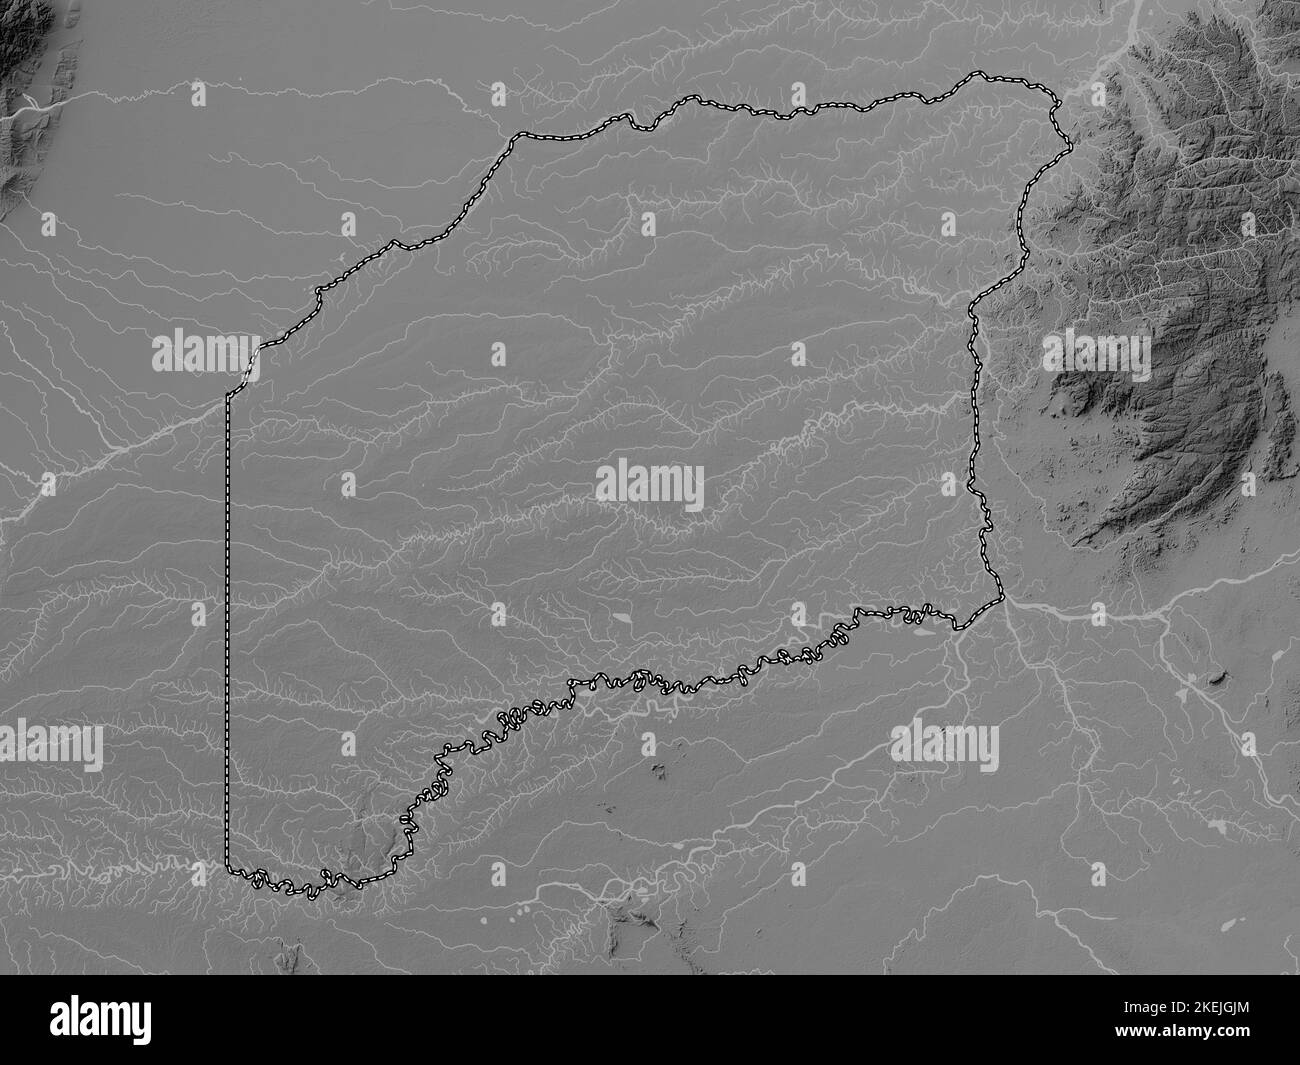 Vichada, commissiary of Colombia. Grayscale elevation map with lakes and rivers Stock Photo